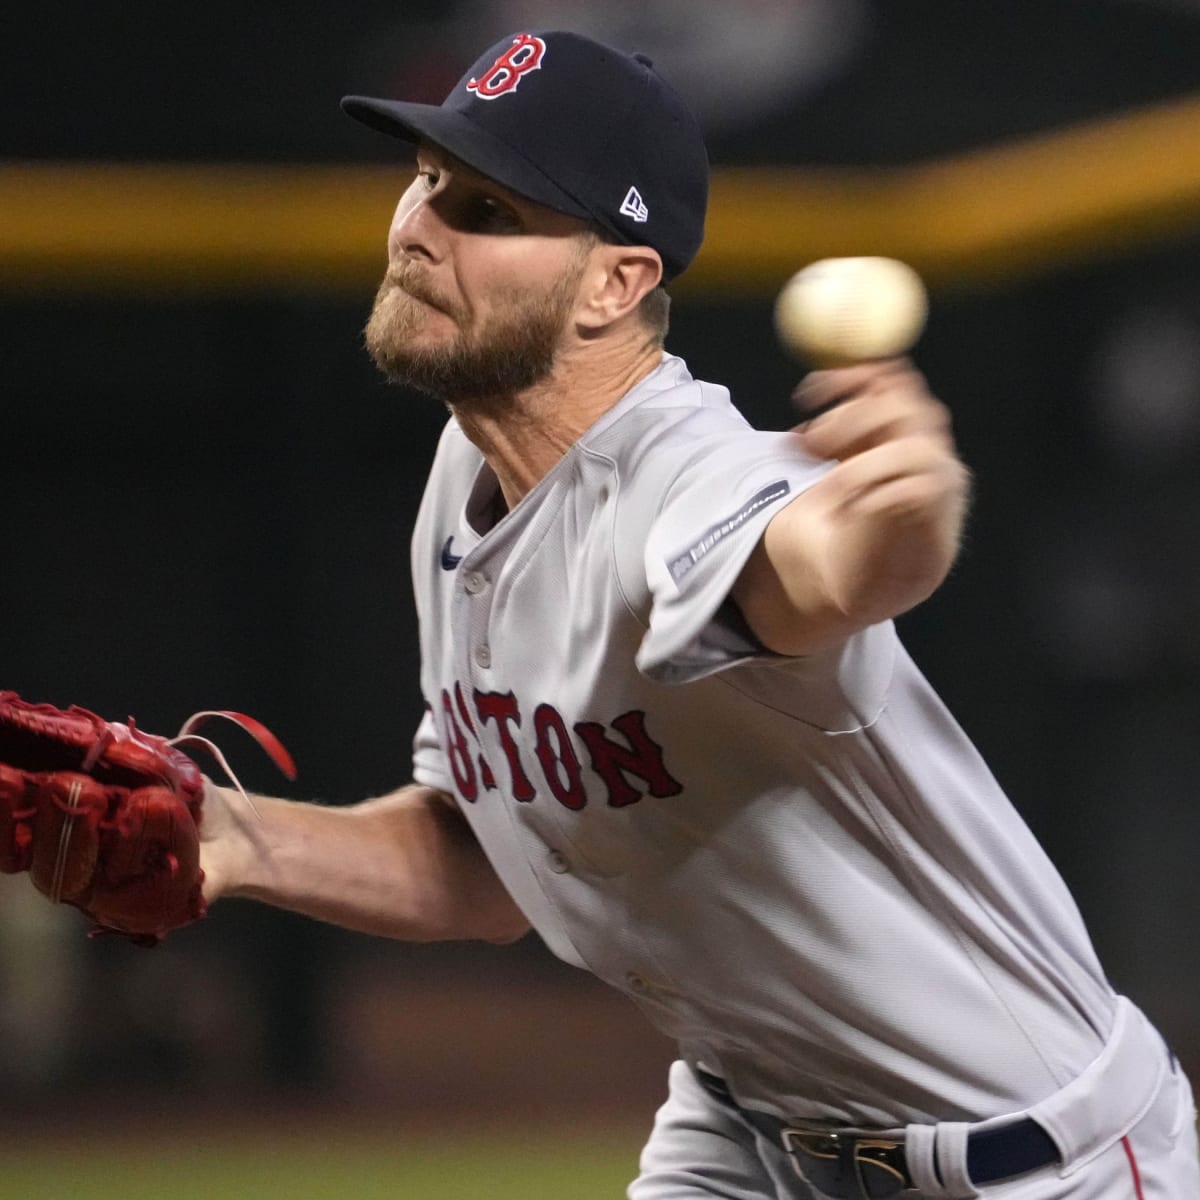 Chris Sale moved to 60-day injured list with shoulder injury